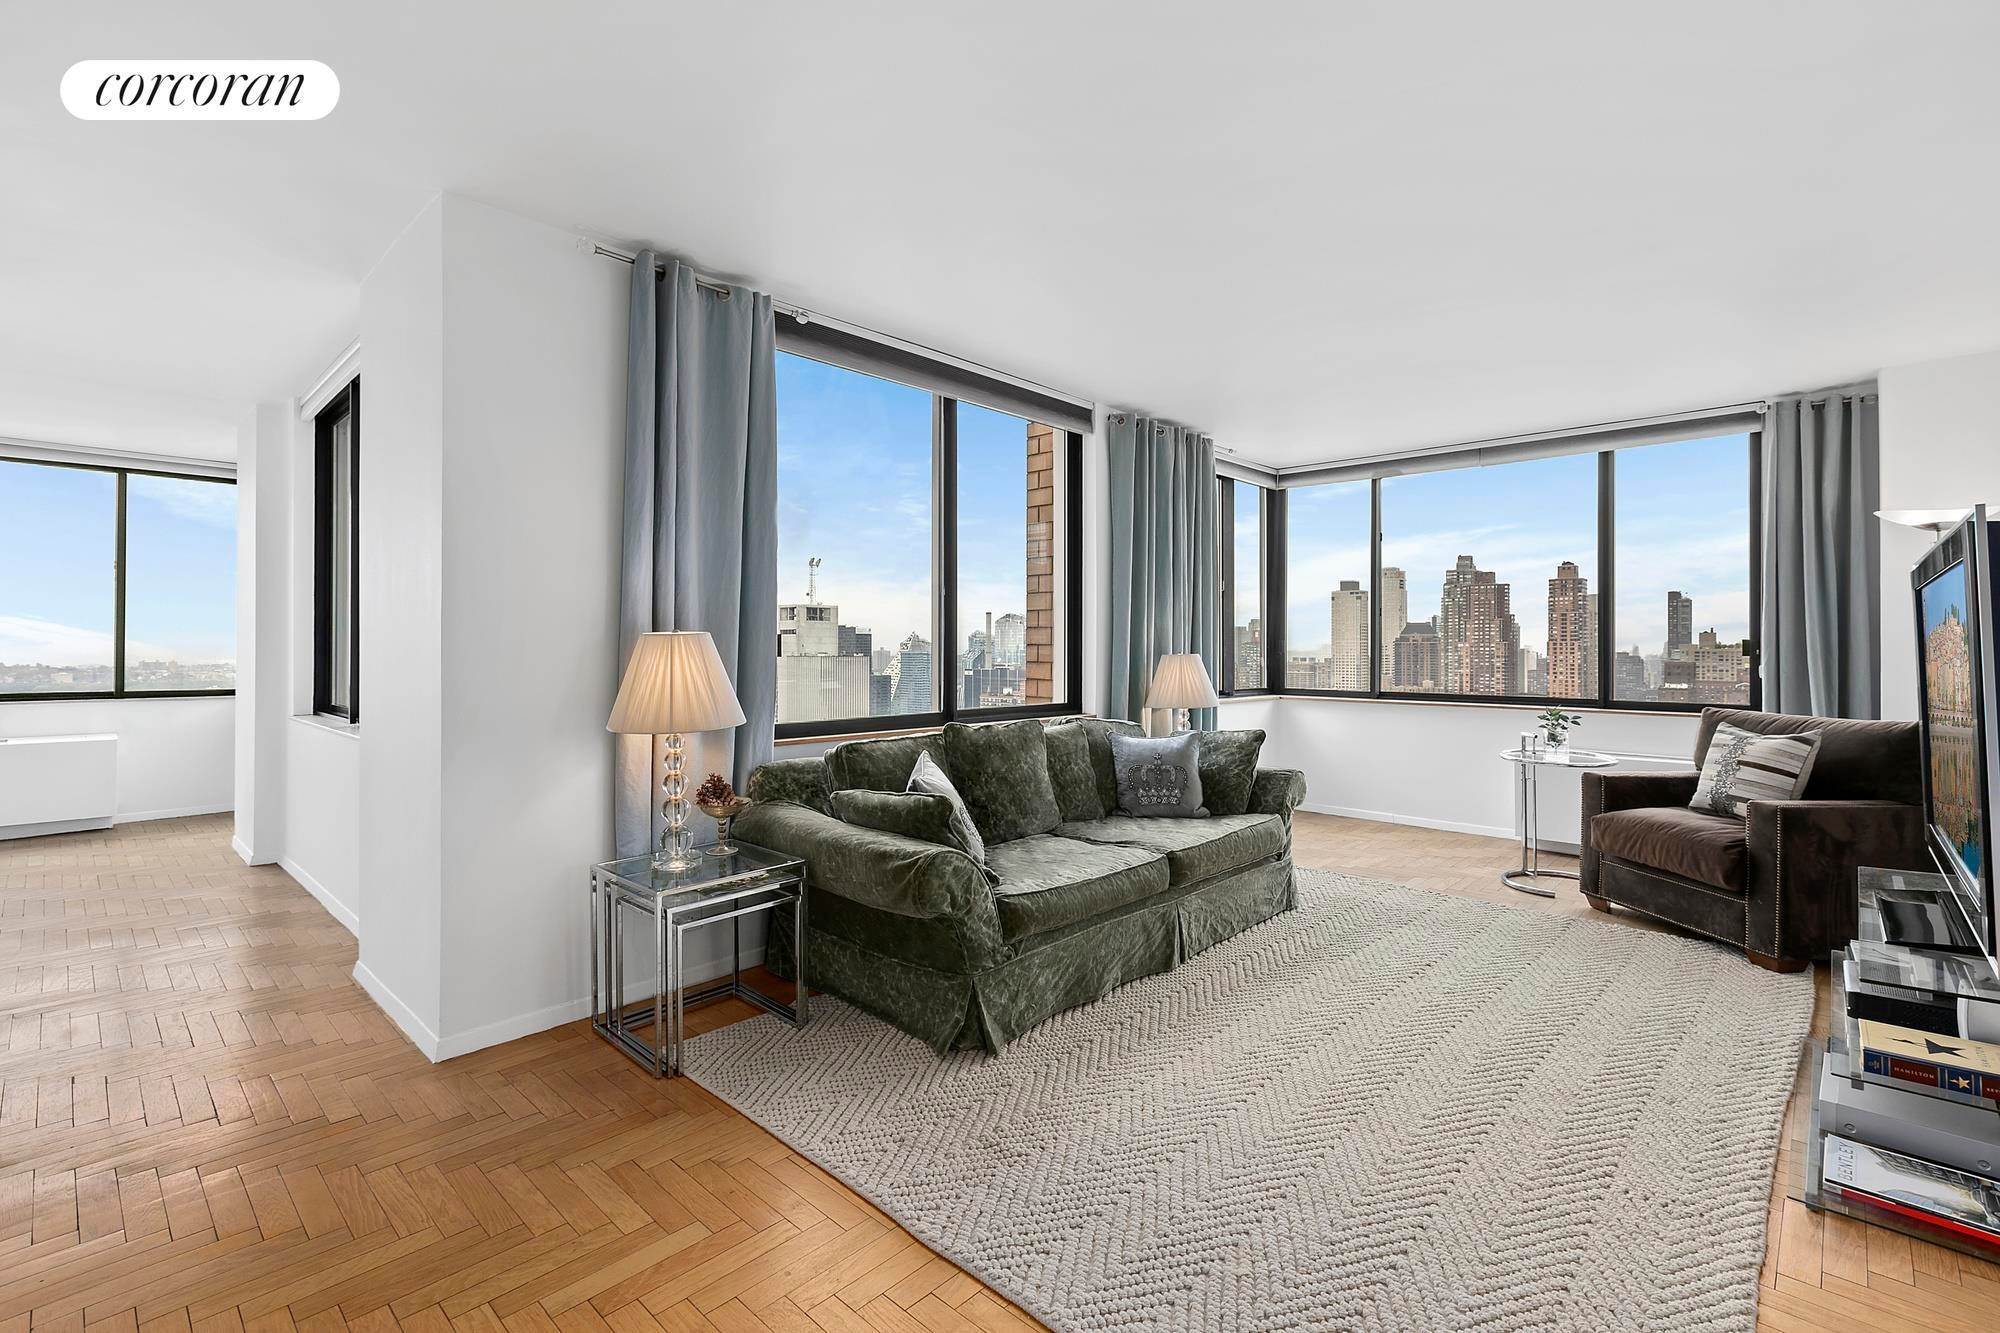 The Residences At Worldwide Plaza (2Wwp) xây dựng tại 350 West 50th Street, Hell's Kitchen, Manhattan, NY 10019